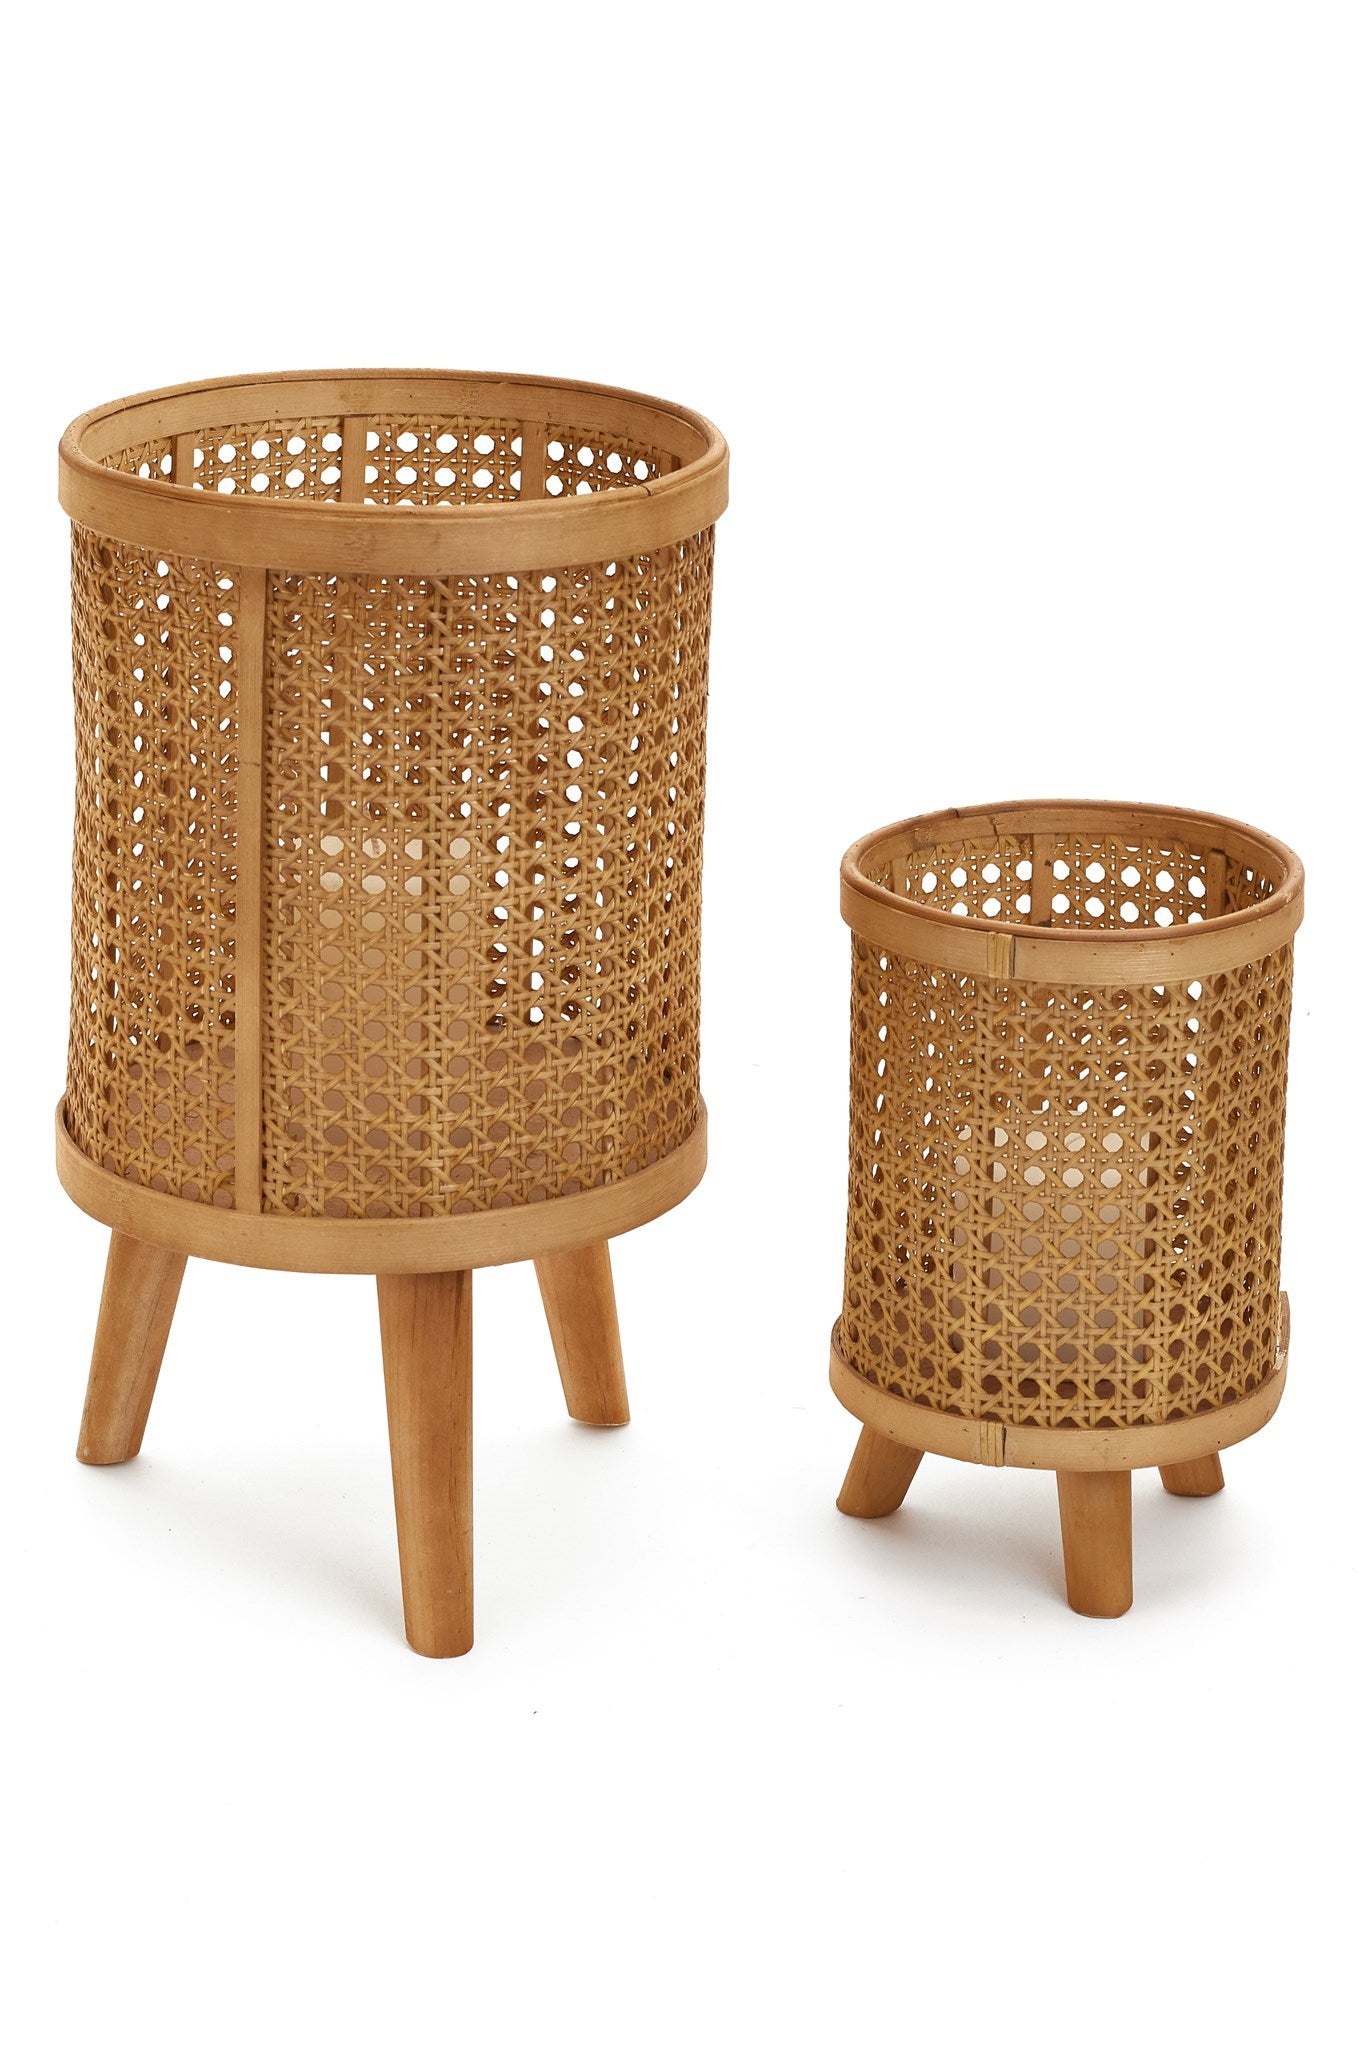 Tan Bamboo Planters with Legs 